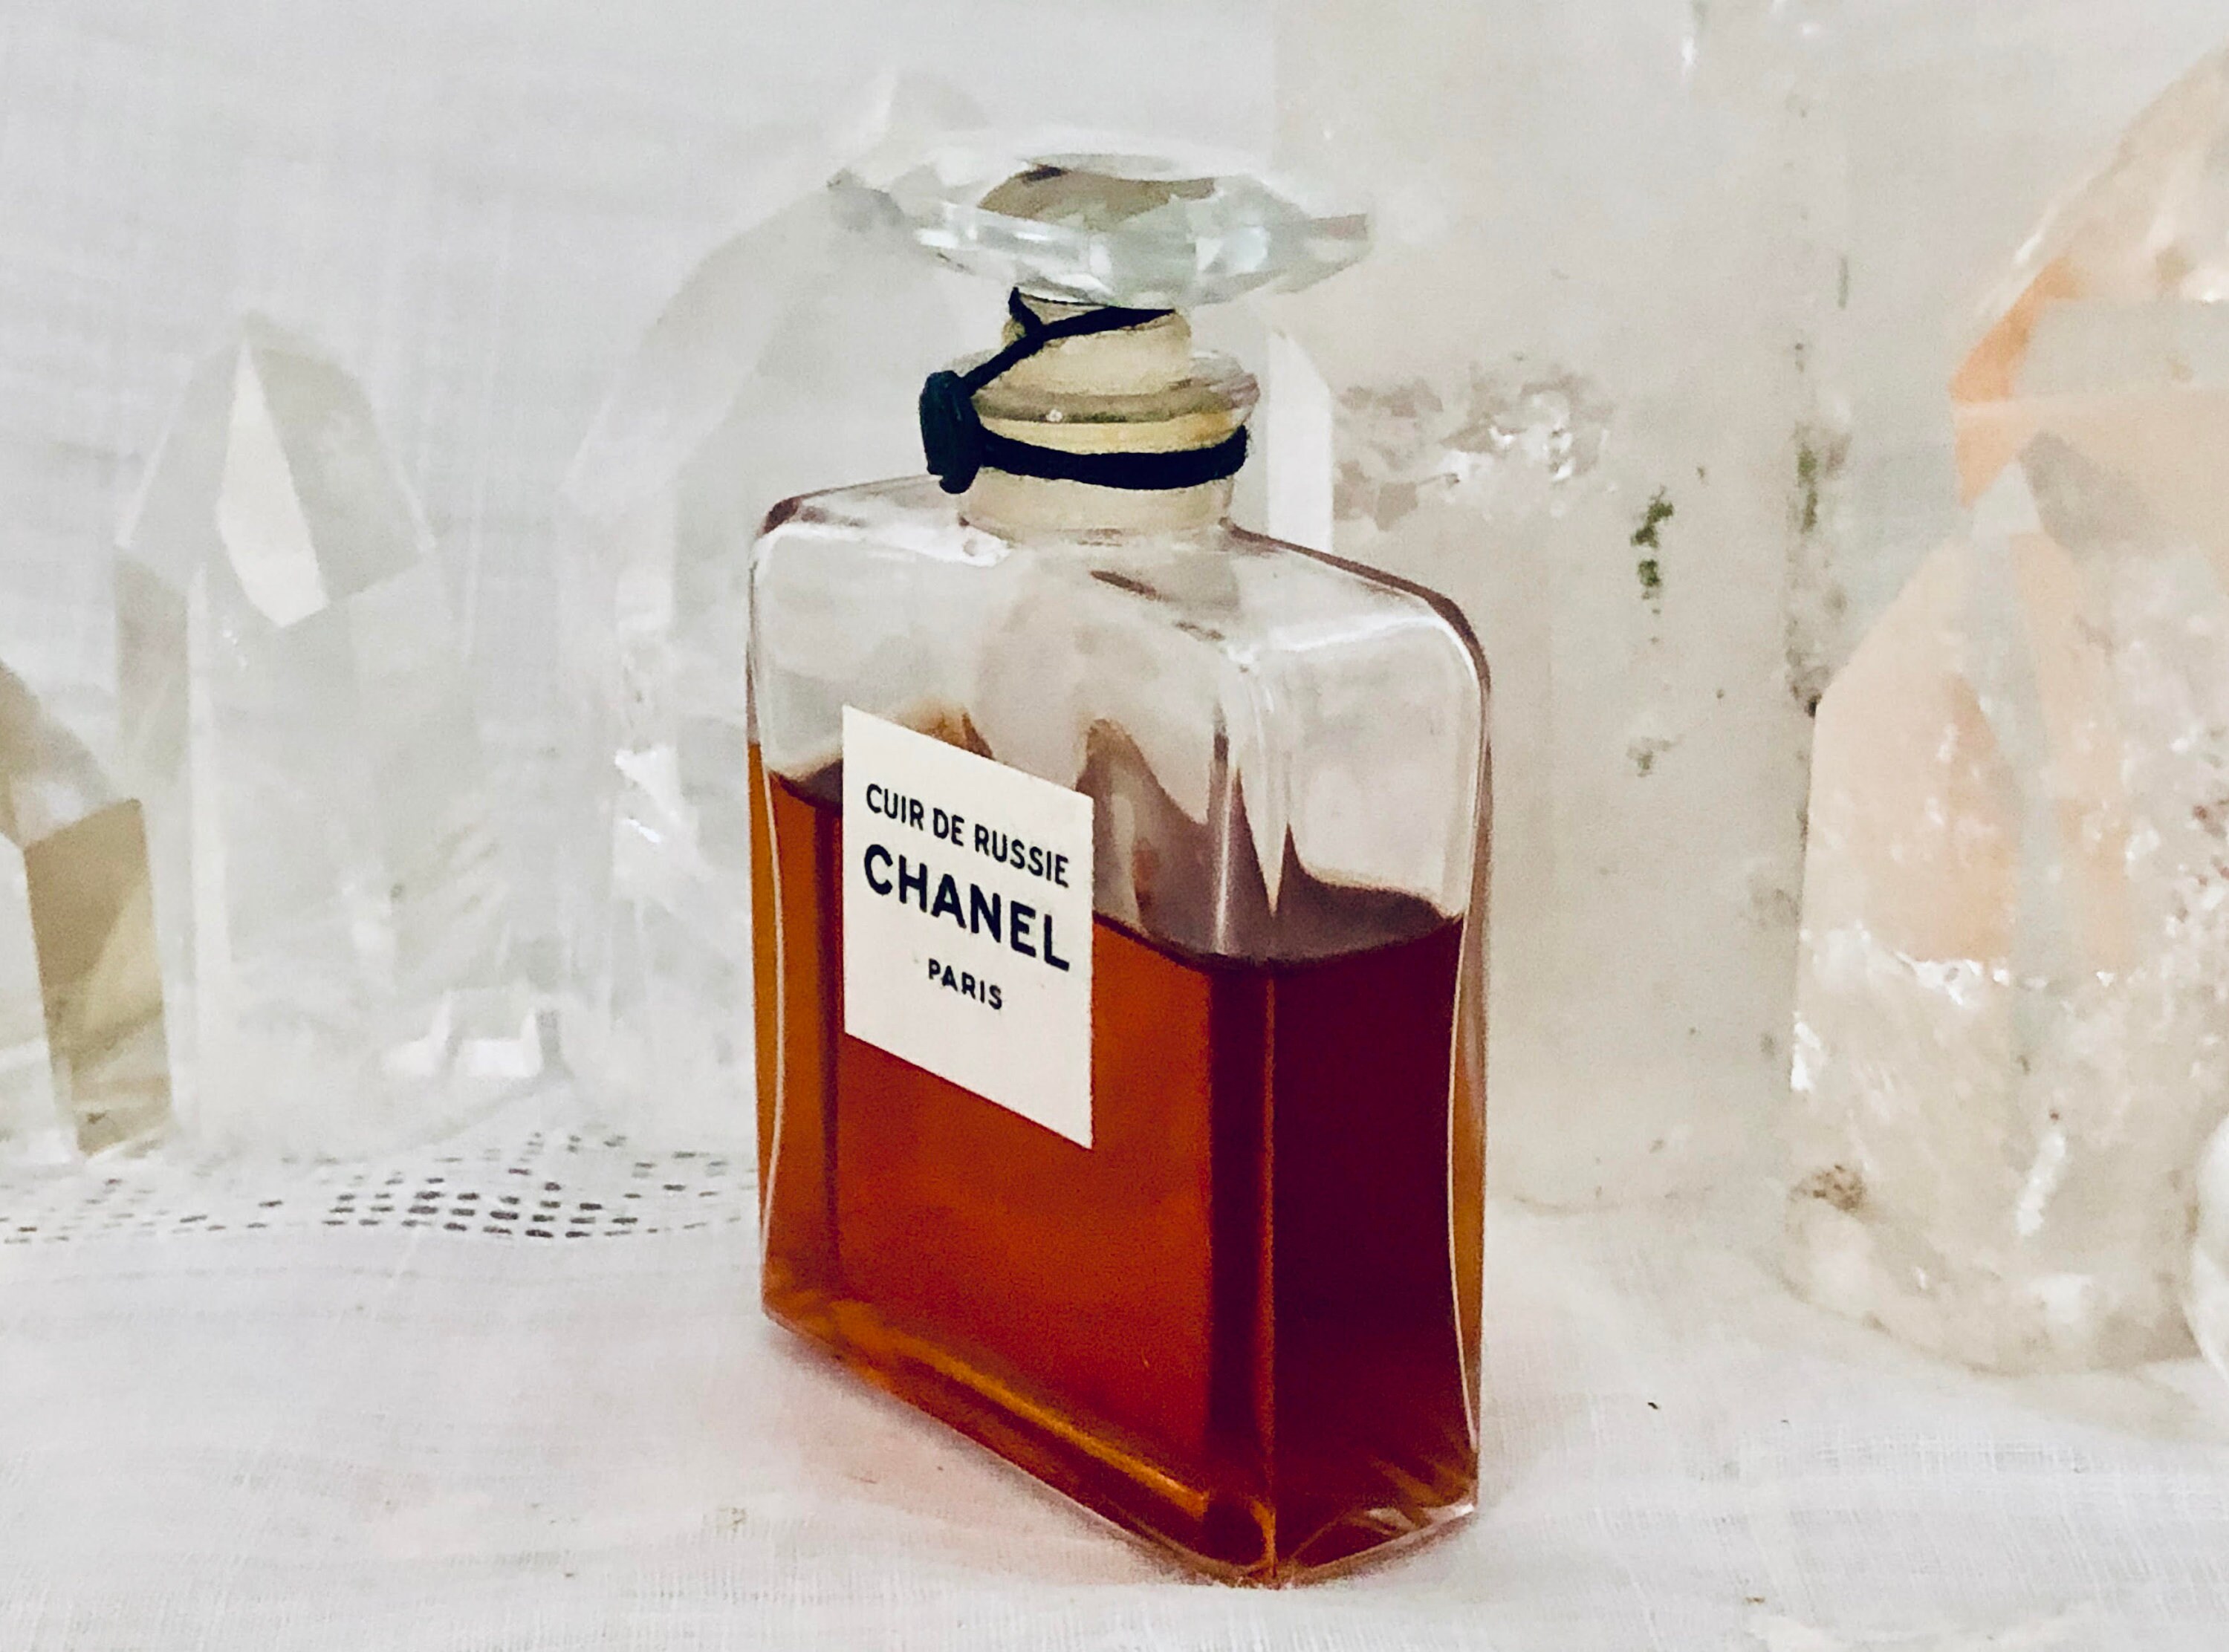 chanel no 5 for men